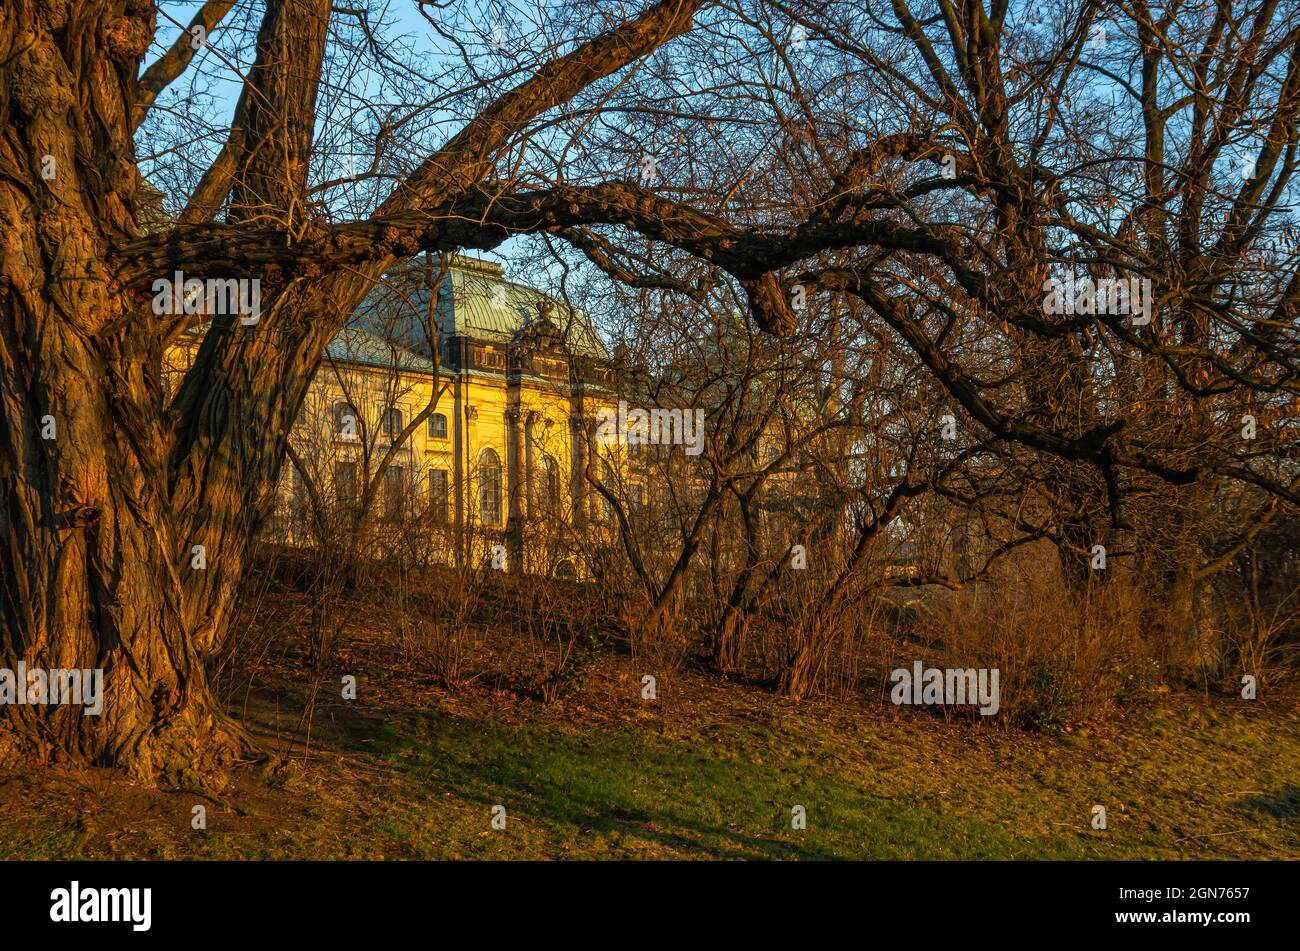 Dresden, Saxony, Germany: The Japanese Palace on Königsufer, home of the Museum of Ethnology, seen from the back and in the evening light. Stock Photo